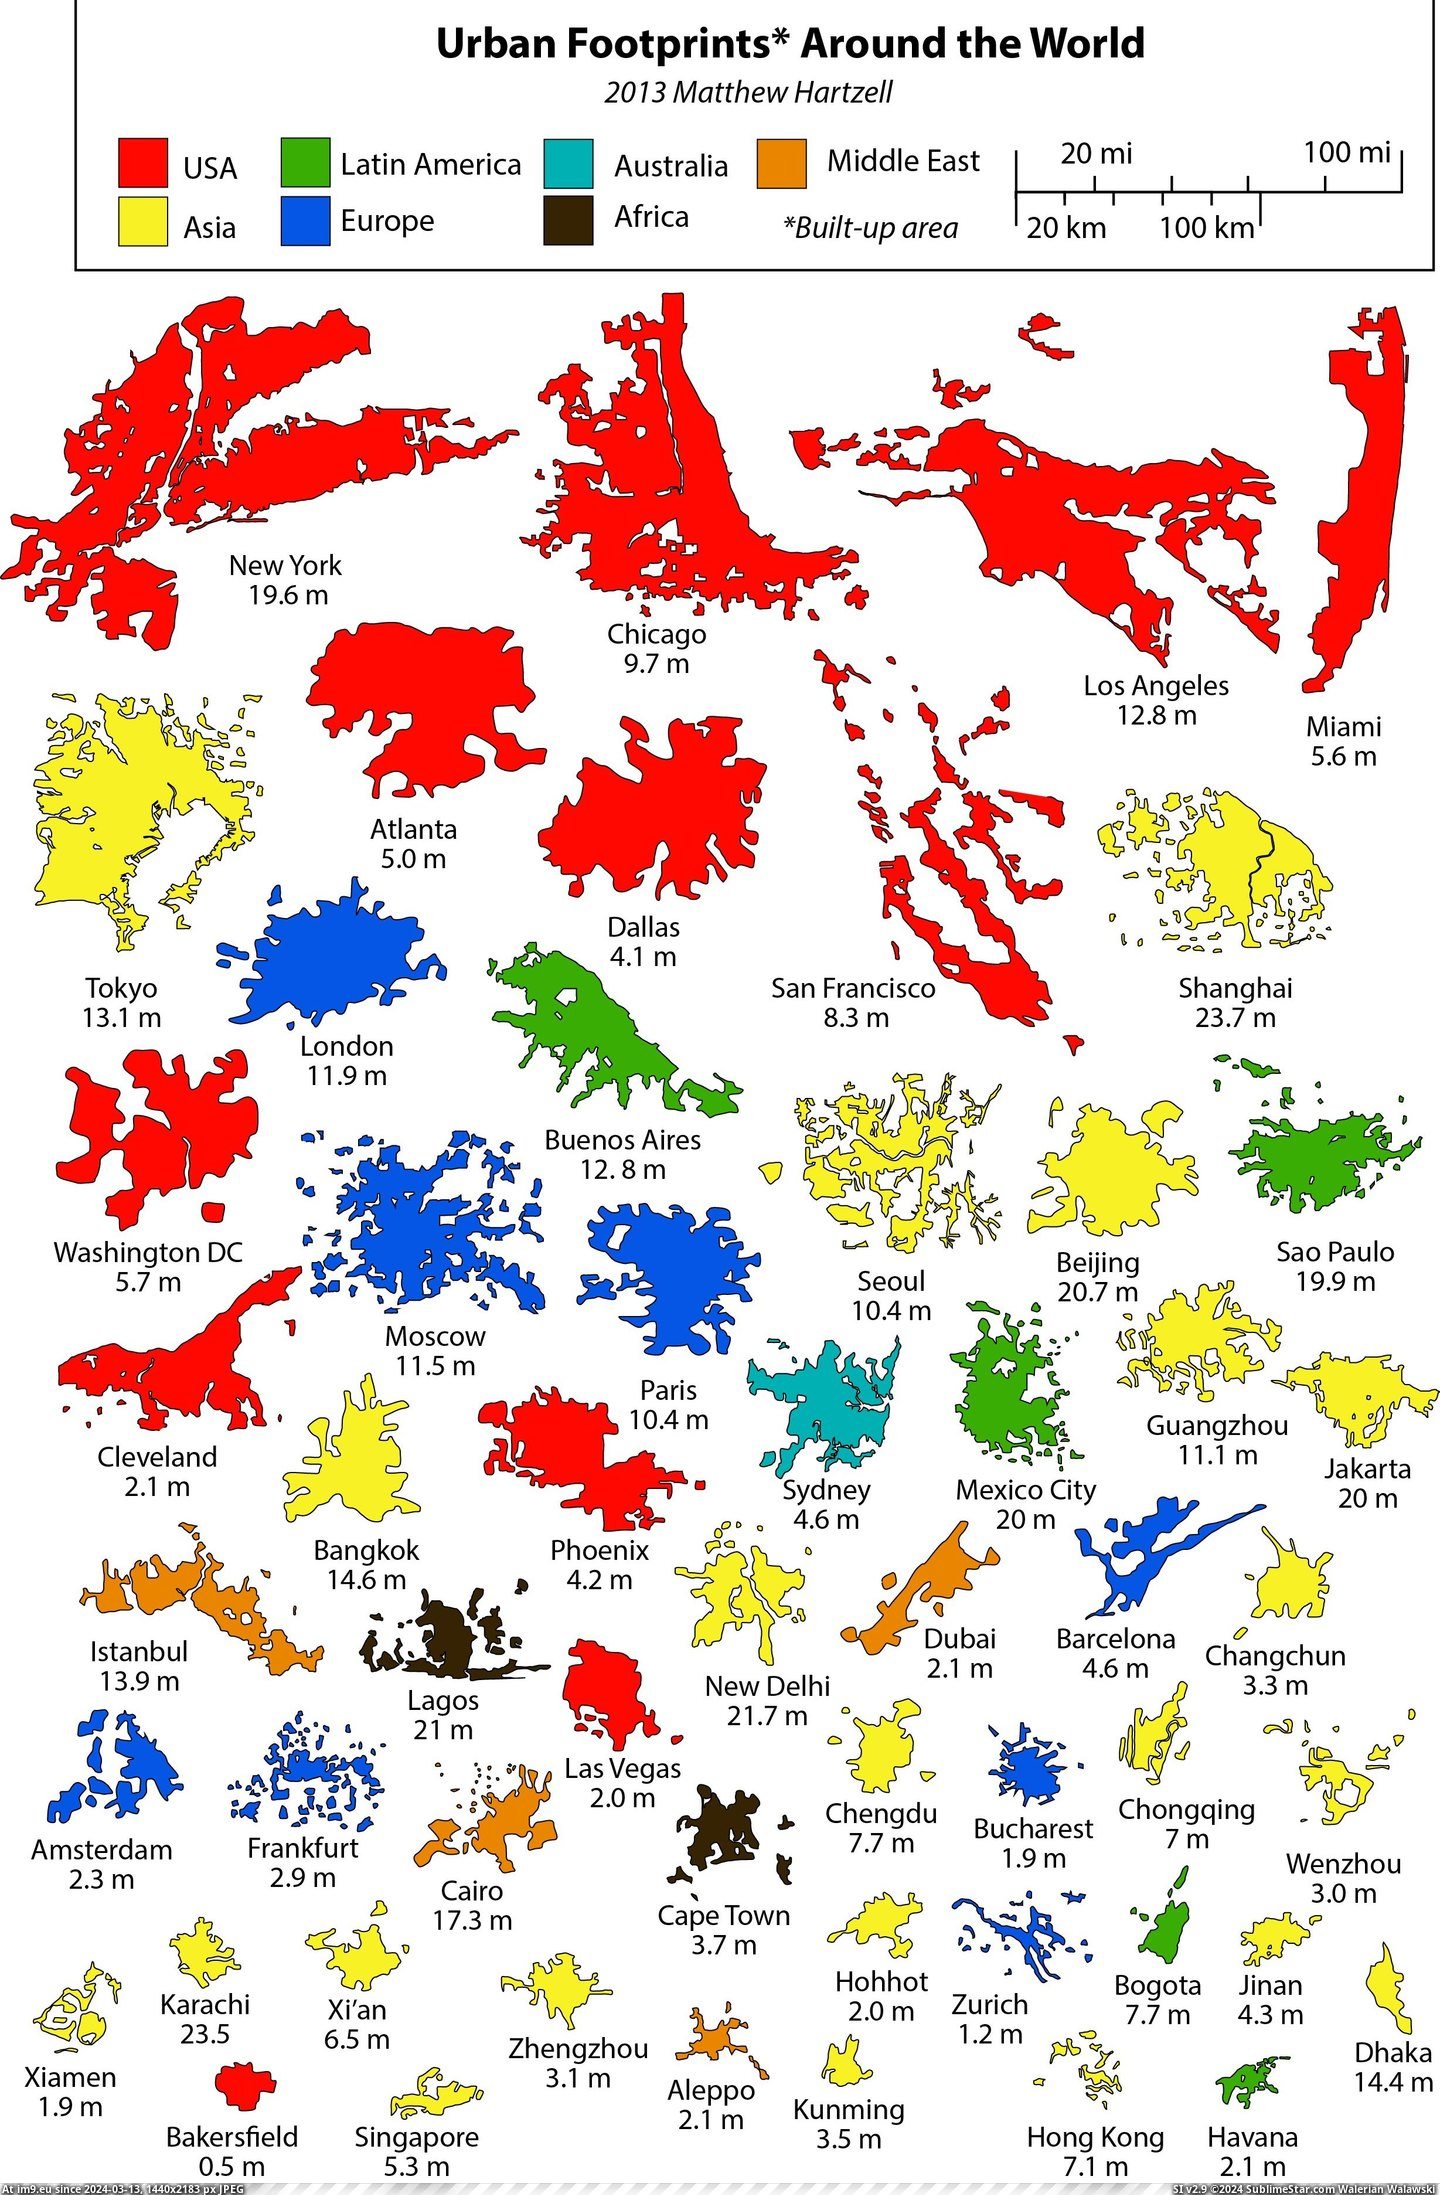 #World #City #Comparing #Footprints #Urban #Sizes [Mapporn] Urban Footprints Around the World - Comparing City Sizes [2457x3736] Pic. (Image of album My r/MAPS favs))